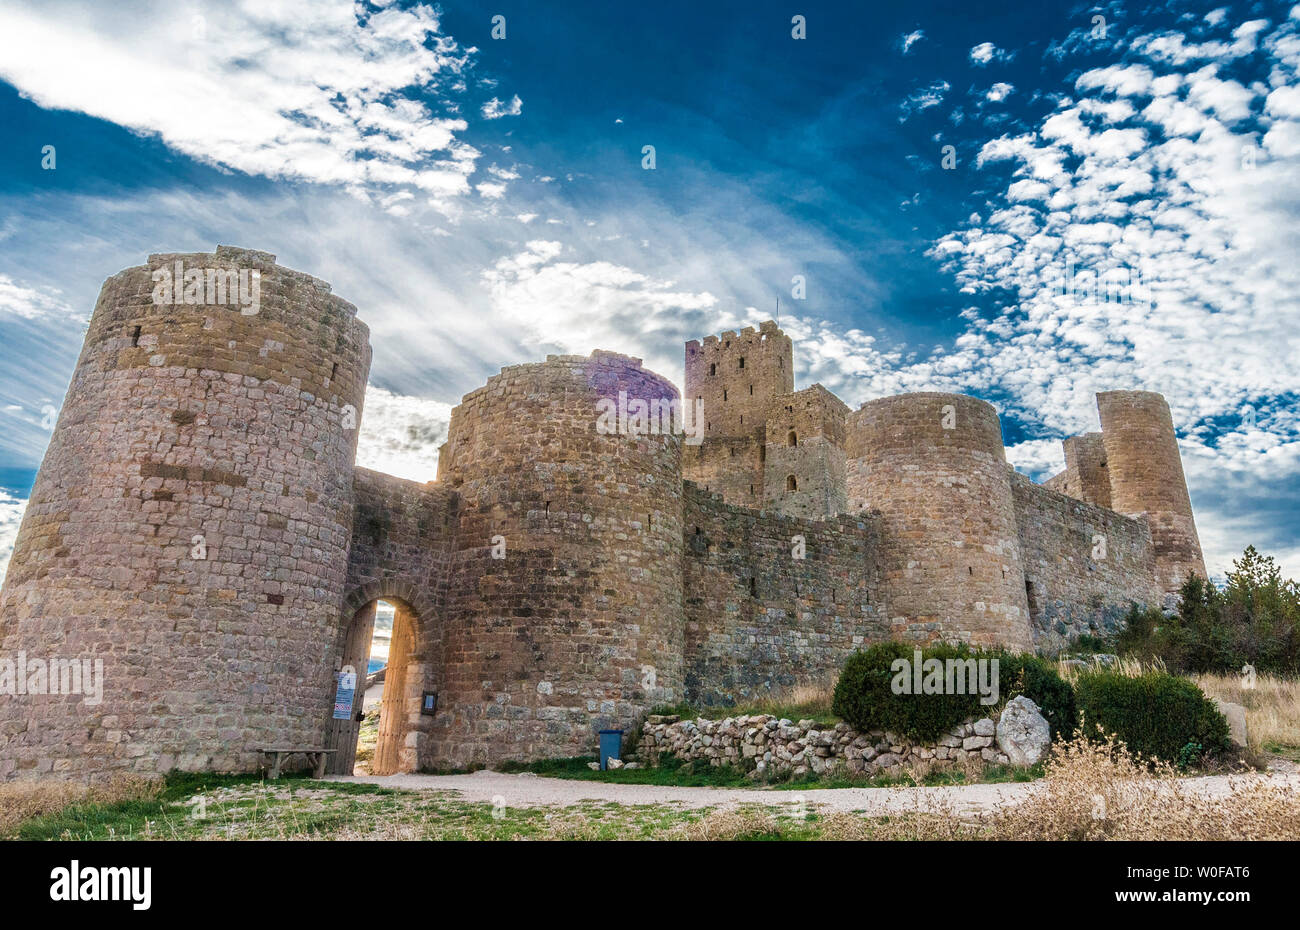 Spain, Autonomous Community of Aragon, province of Huesca, fortress of Loarre (11th - 13th century) Stock Photo